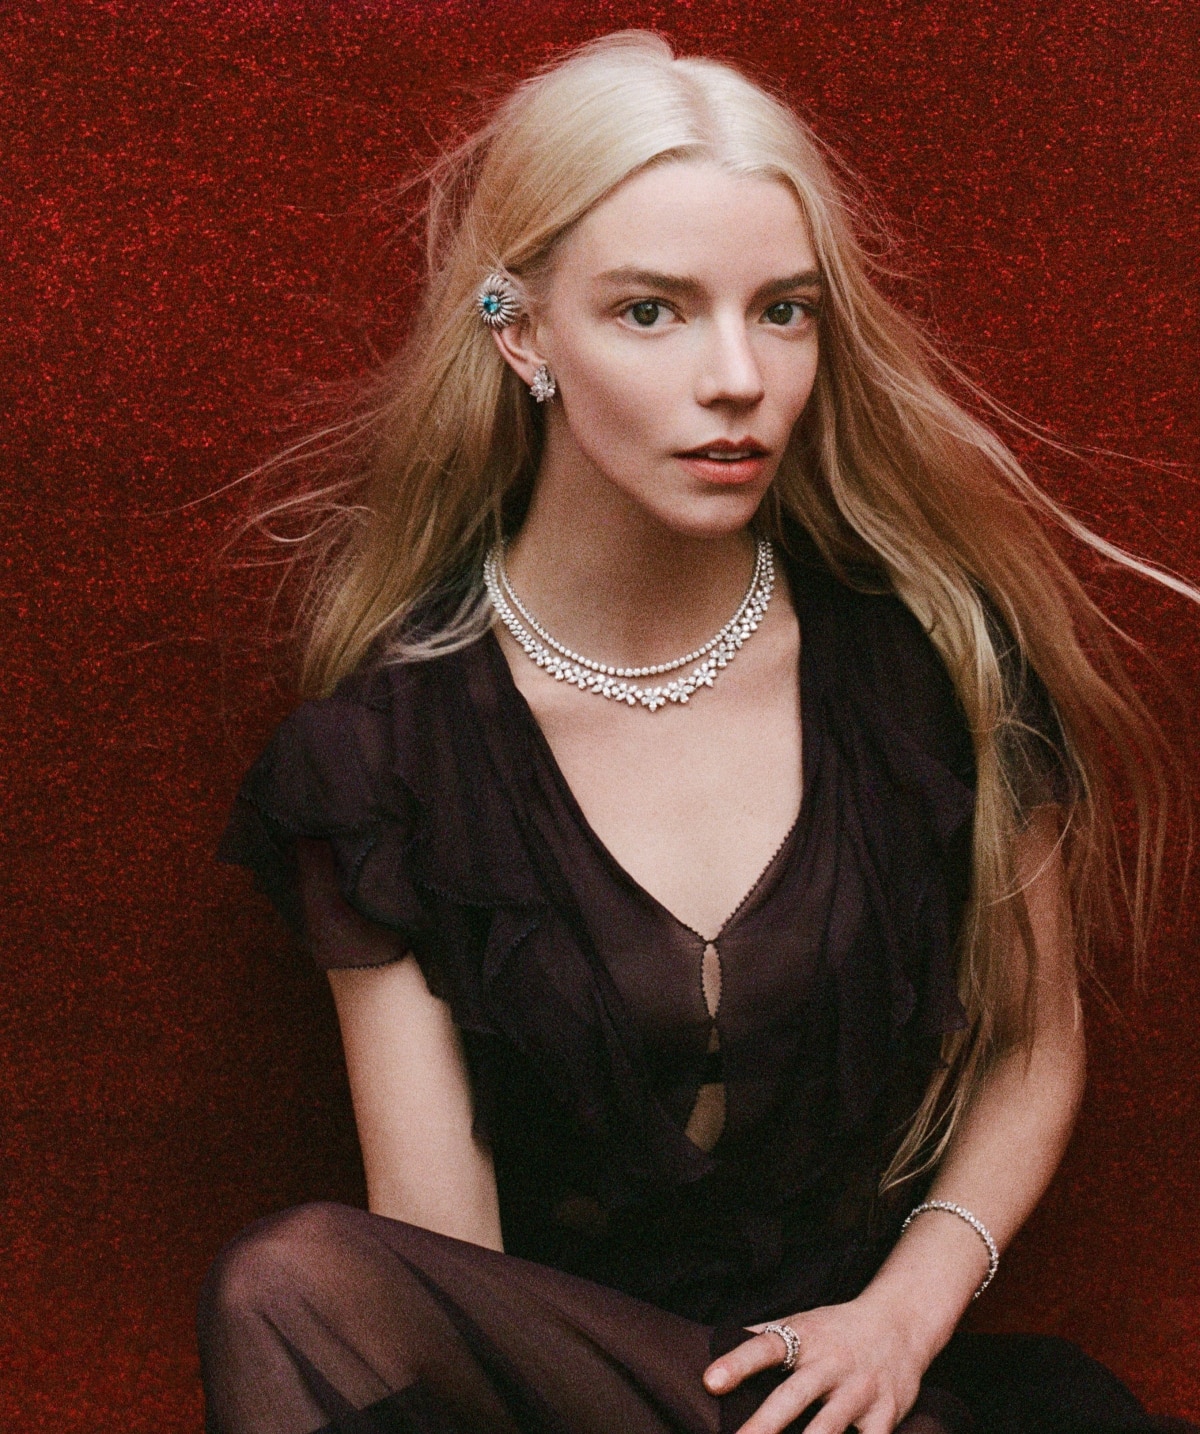 Anya Taylor-Joy Recalls Being Bullied for Her Looks